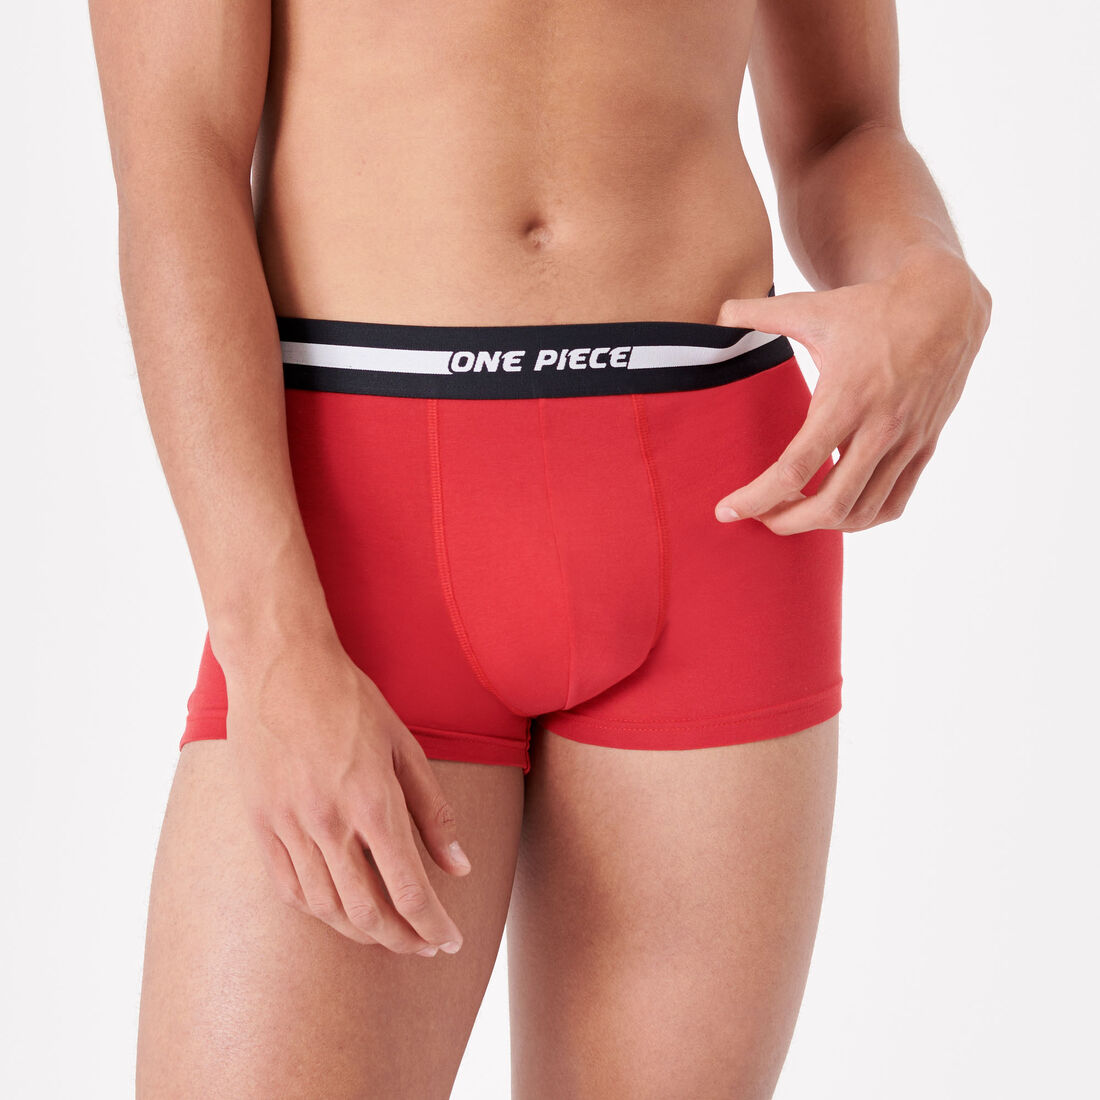 one piece boxers;